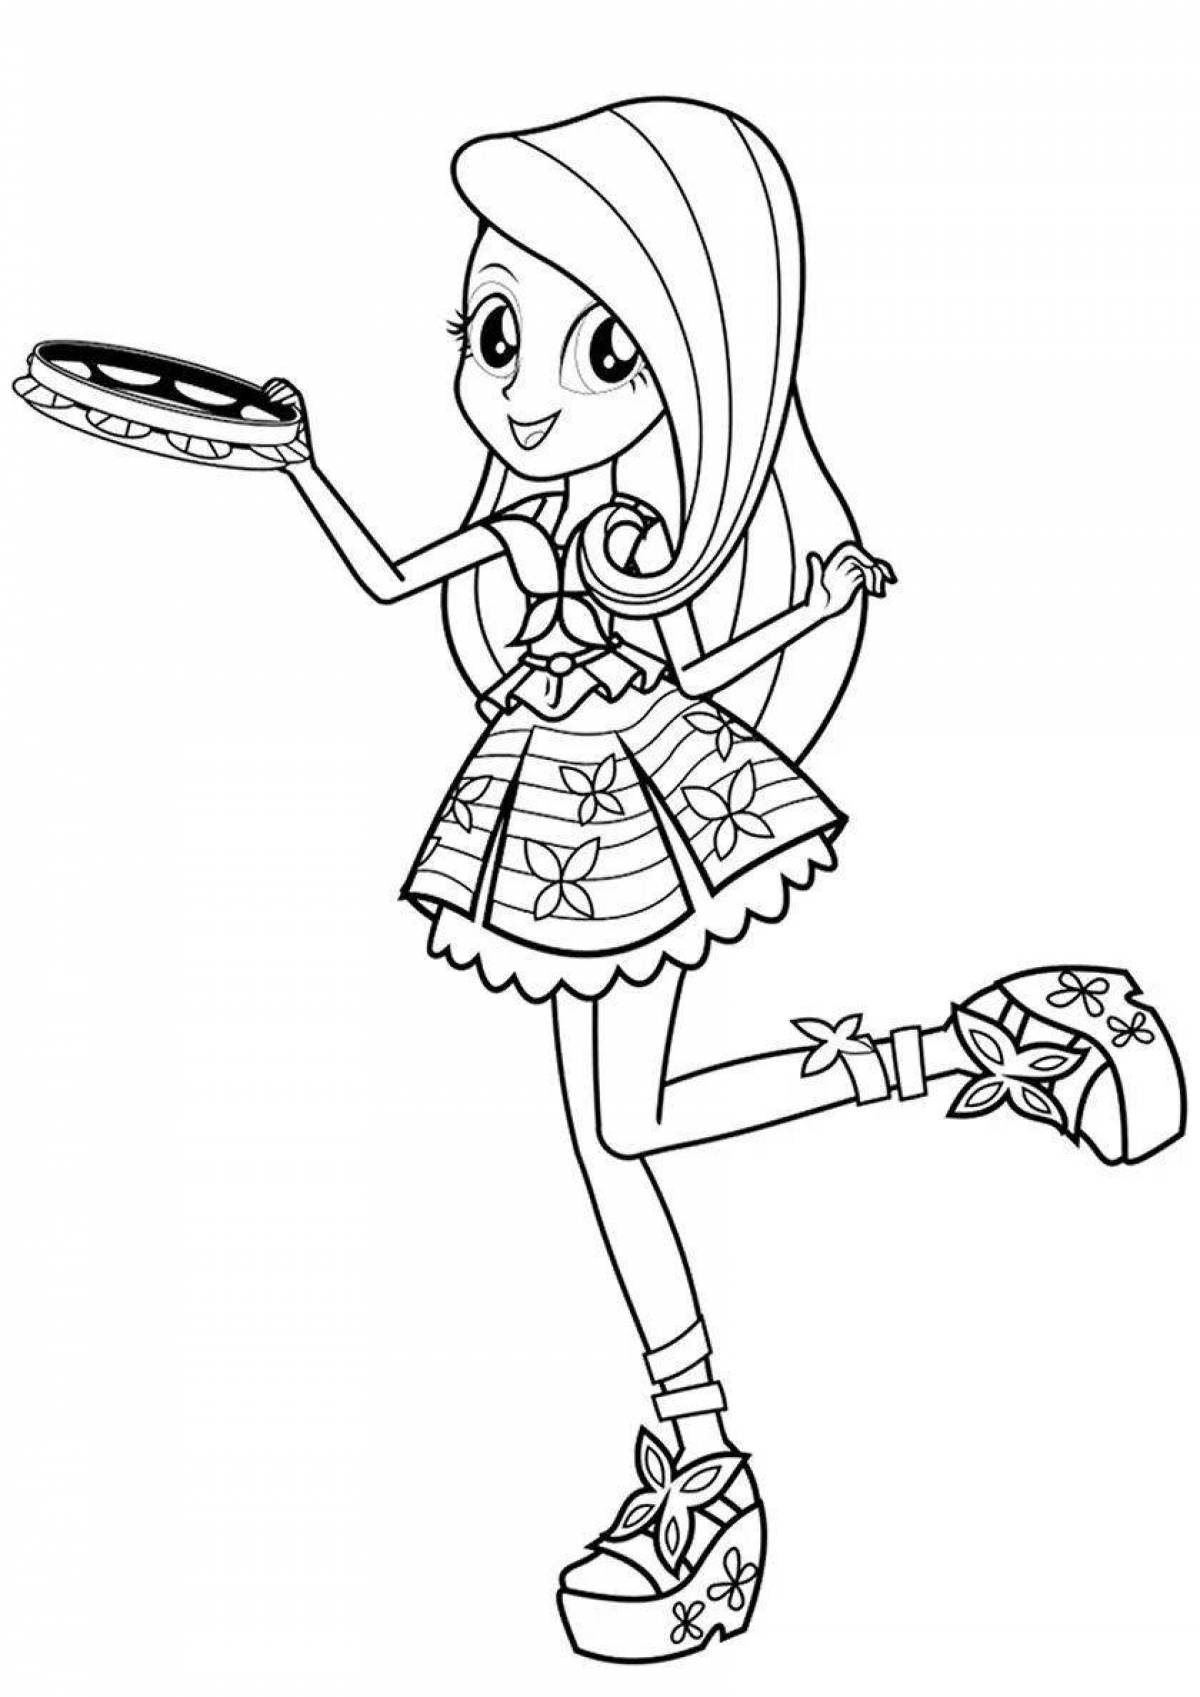 Coloring page enthusiastic equestria girls